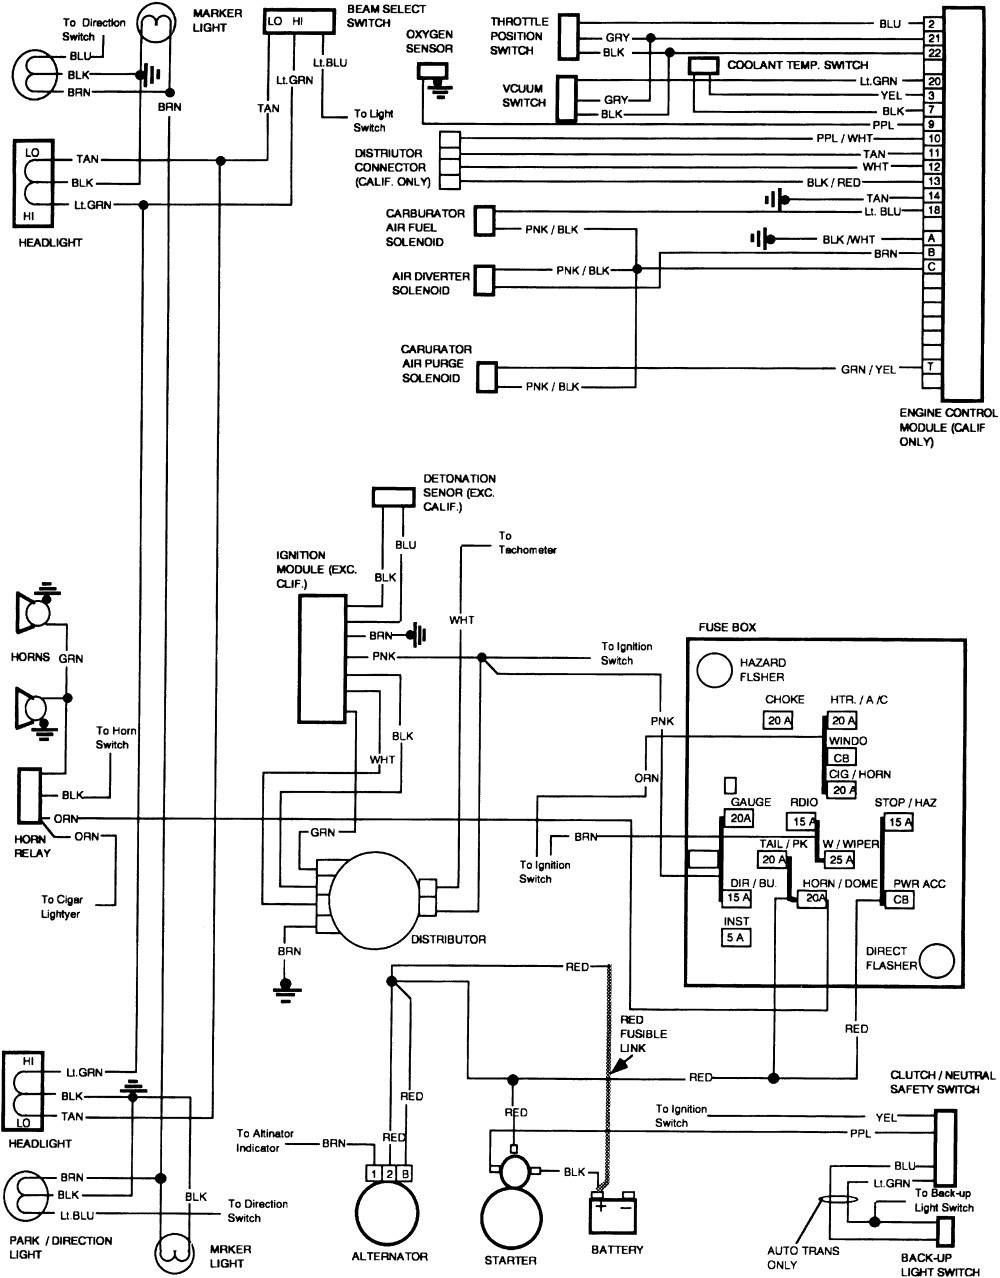 Diagramevy Truck Engine Wiring Headlight And 1982 Chevy Diagram Automotive Electrical Diagrams Car Software Free